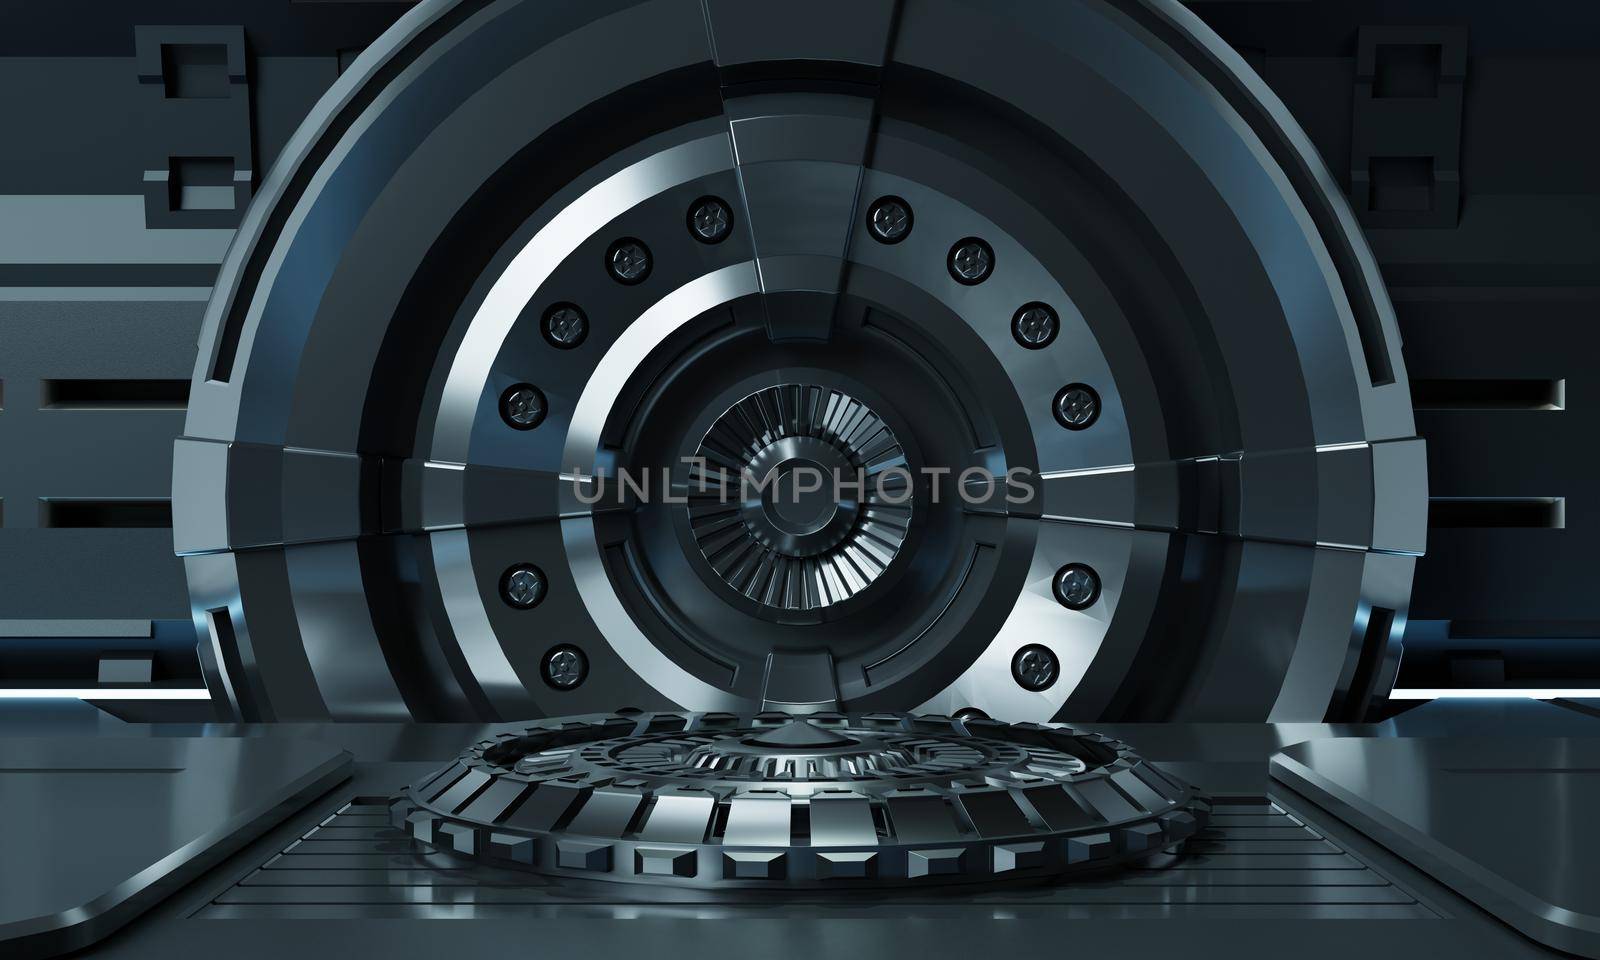 Sci-fi product podium showcase inside spaceship with security metal gate background. Technology and object concept. 3D illustration rendering